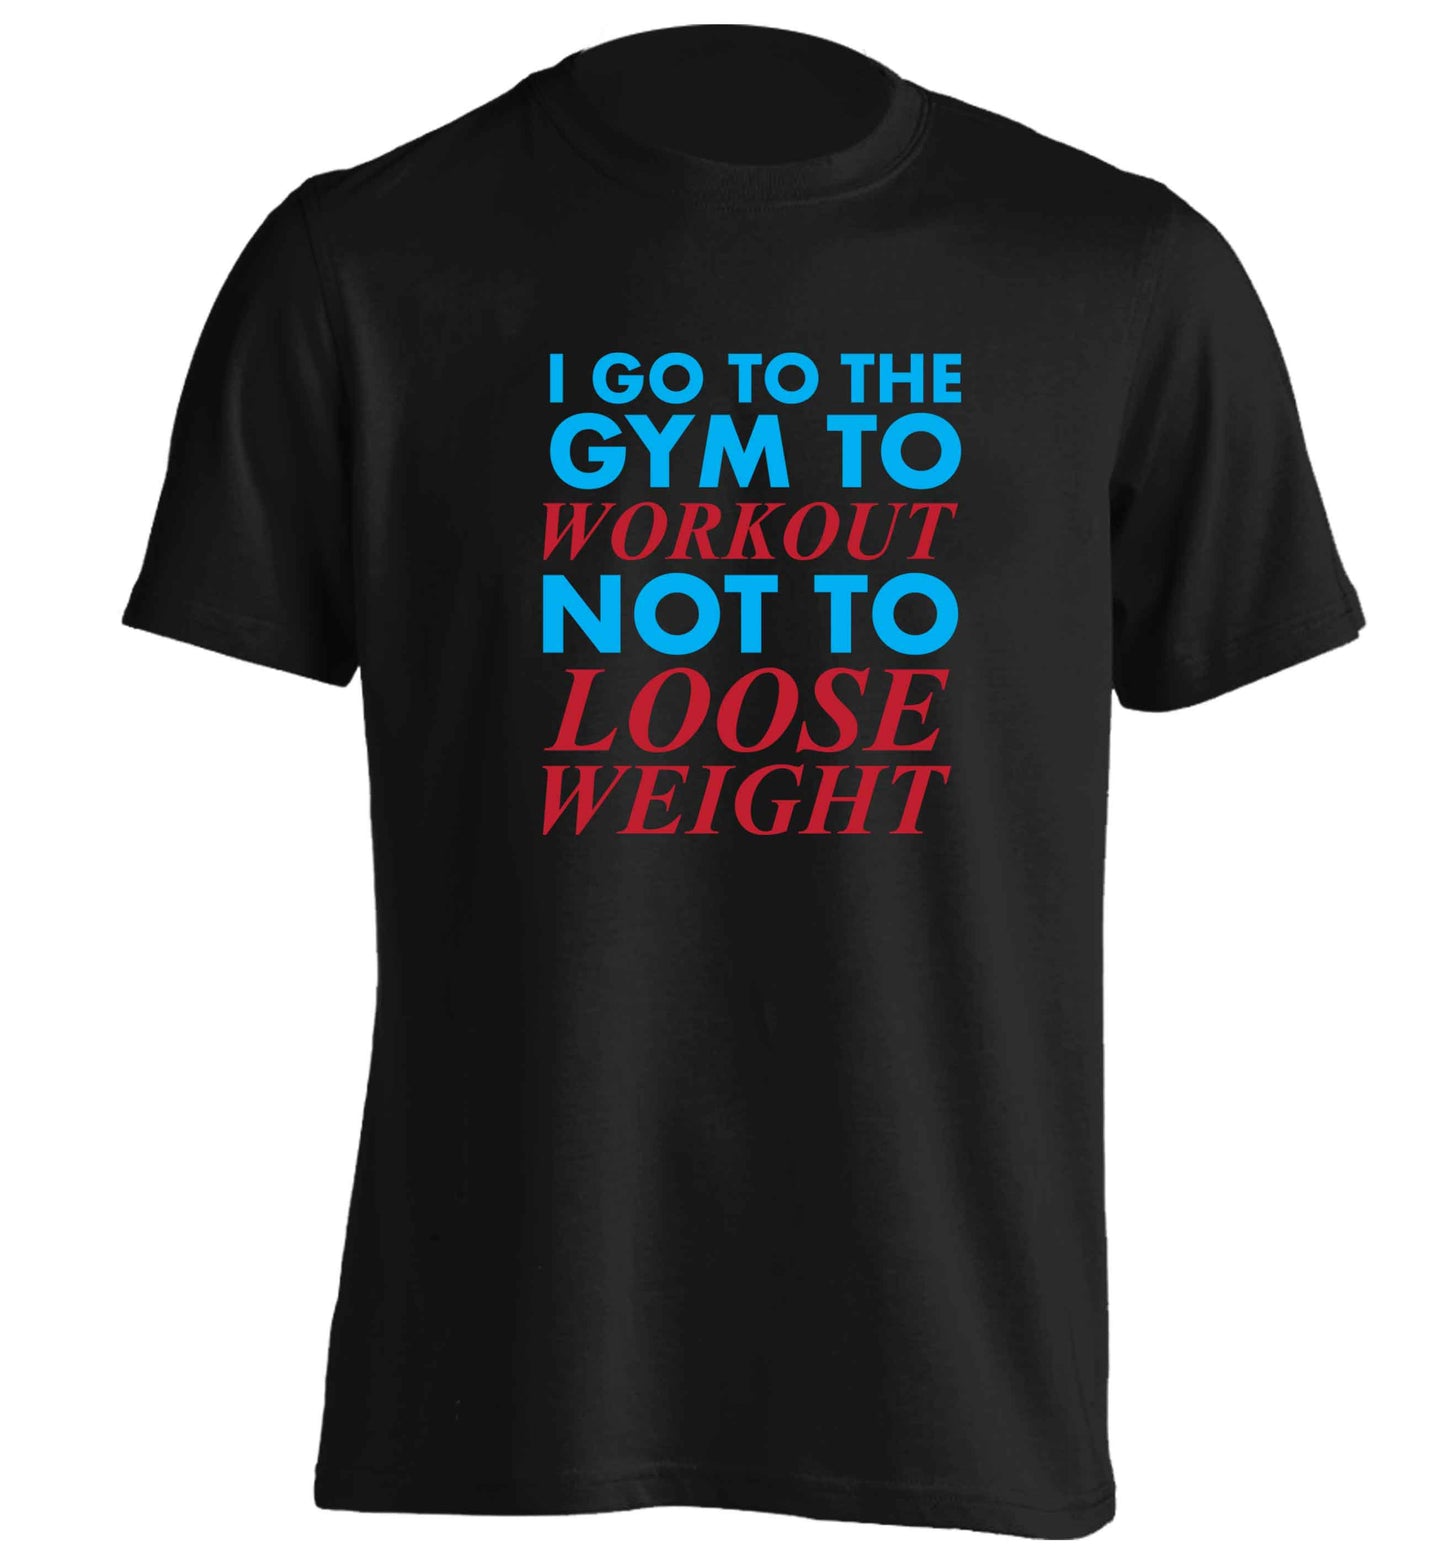 I go to the gym to workout not to loose weight adults unisex black Tshirt 2XL